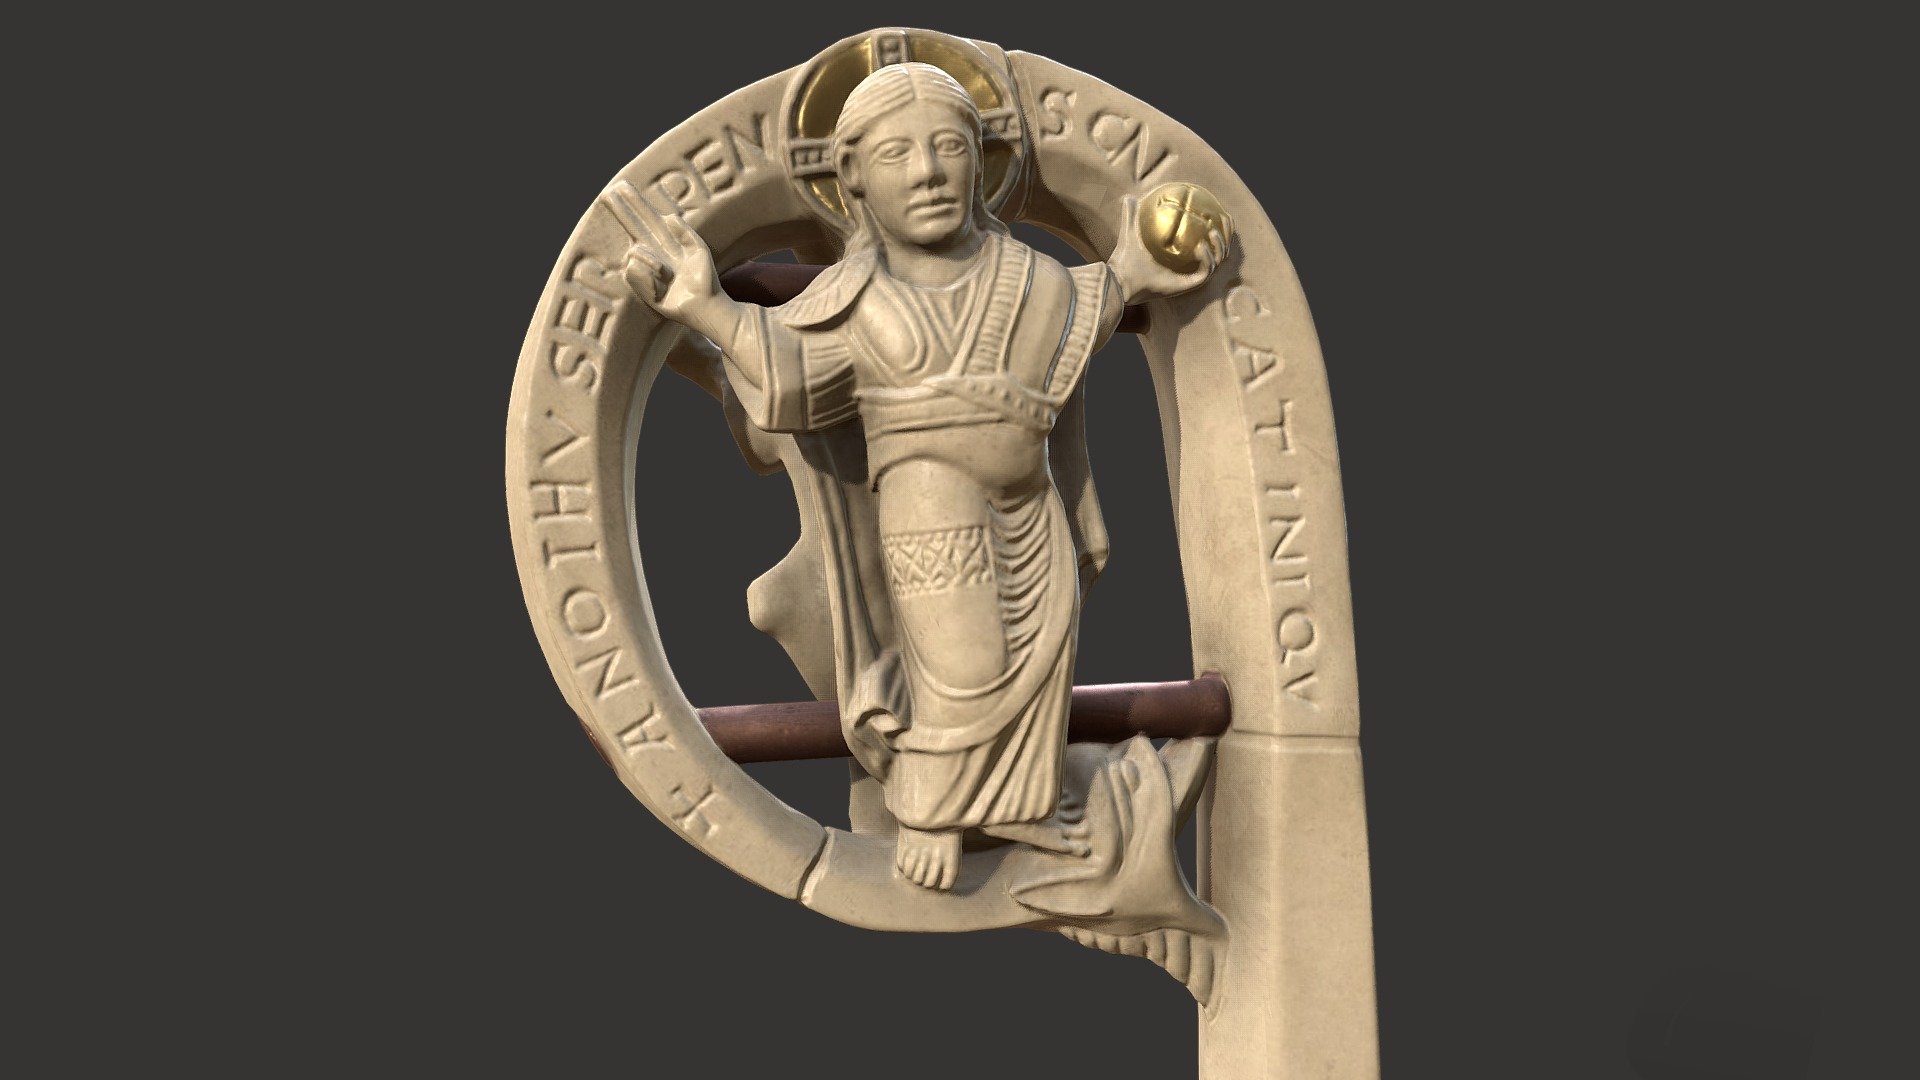 The Ename crosier is the top part of the staff of the abbot of the abbey of Ename, Belgium.  The object has the status of Flemish Masterpiece and was found in 1995 during the archaeological excavations of the abbey.  This digital restoratation shows the state of the crosier after being broken and repaired, somewhere between 1175 and 1390.  The original state of the crosier can be seen at https://sketchfab.com/models/2d3500a046484714af9b5c533adcd7c5 and the excavated object can be seen at https://enameabbey.files.wordpress.com/2015/02/01.jpg. The digital resoration was made by 3D artist Ewout De Vos in Z-Brush.
More information about this crosier can be found at https://enameabbey.wordpress.com/

This work is partially supported by the Department of Culture of the Flemish government 3d model